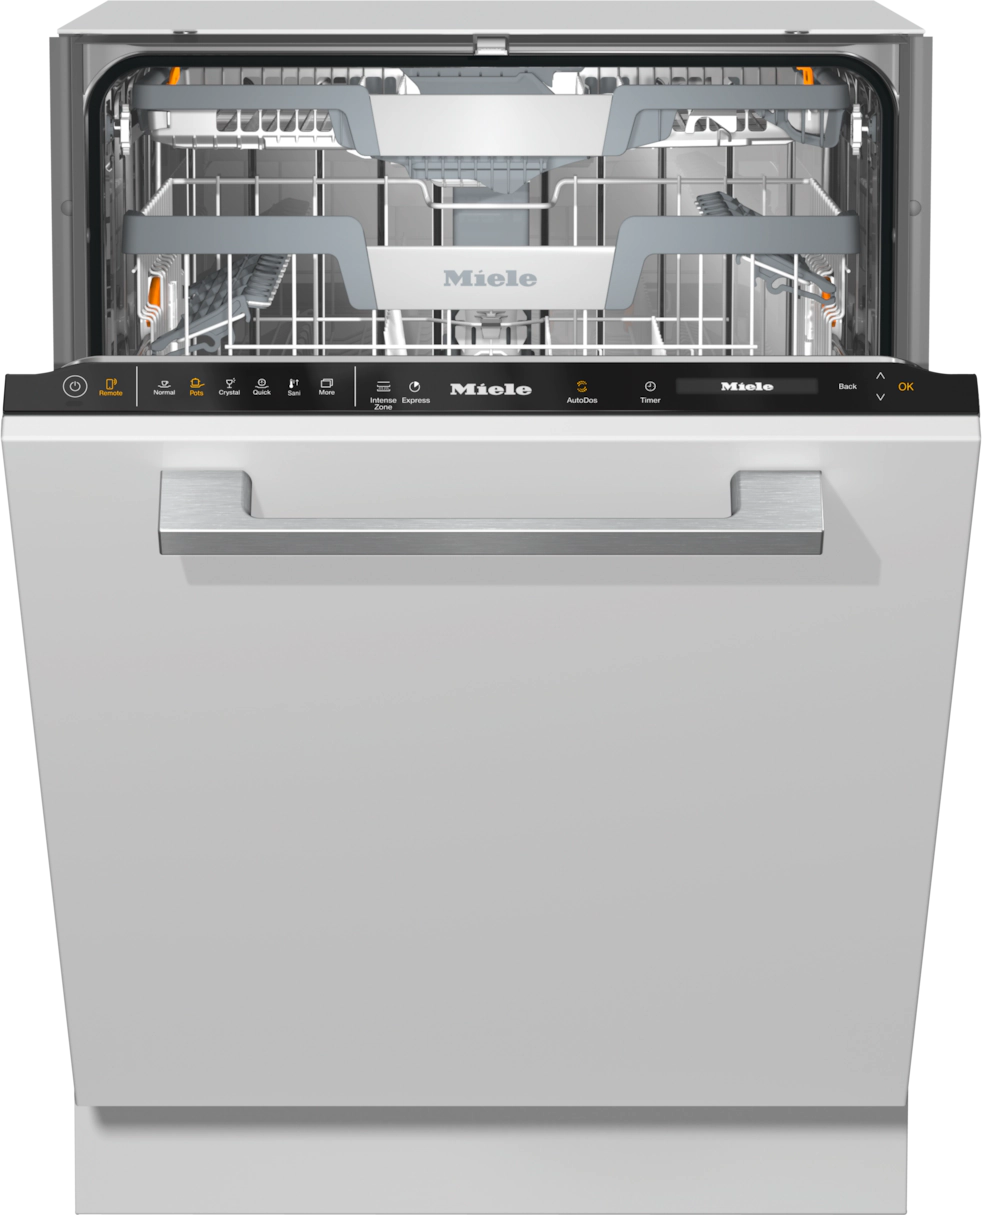 What is the Difference Between the G5000 and G7000 Series of Miele Dishwashers? 2